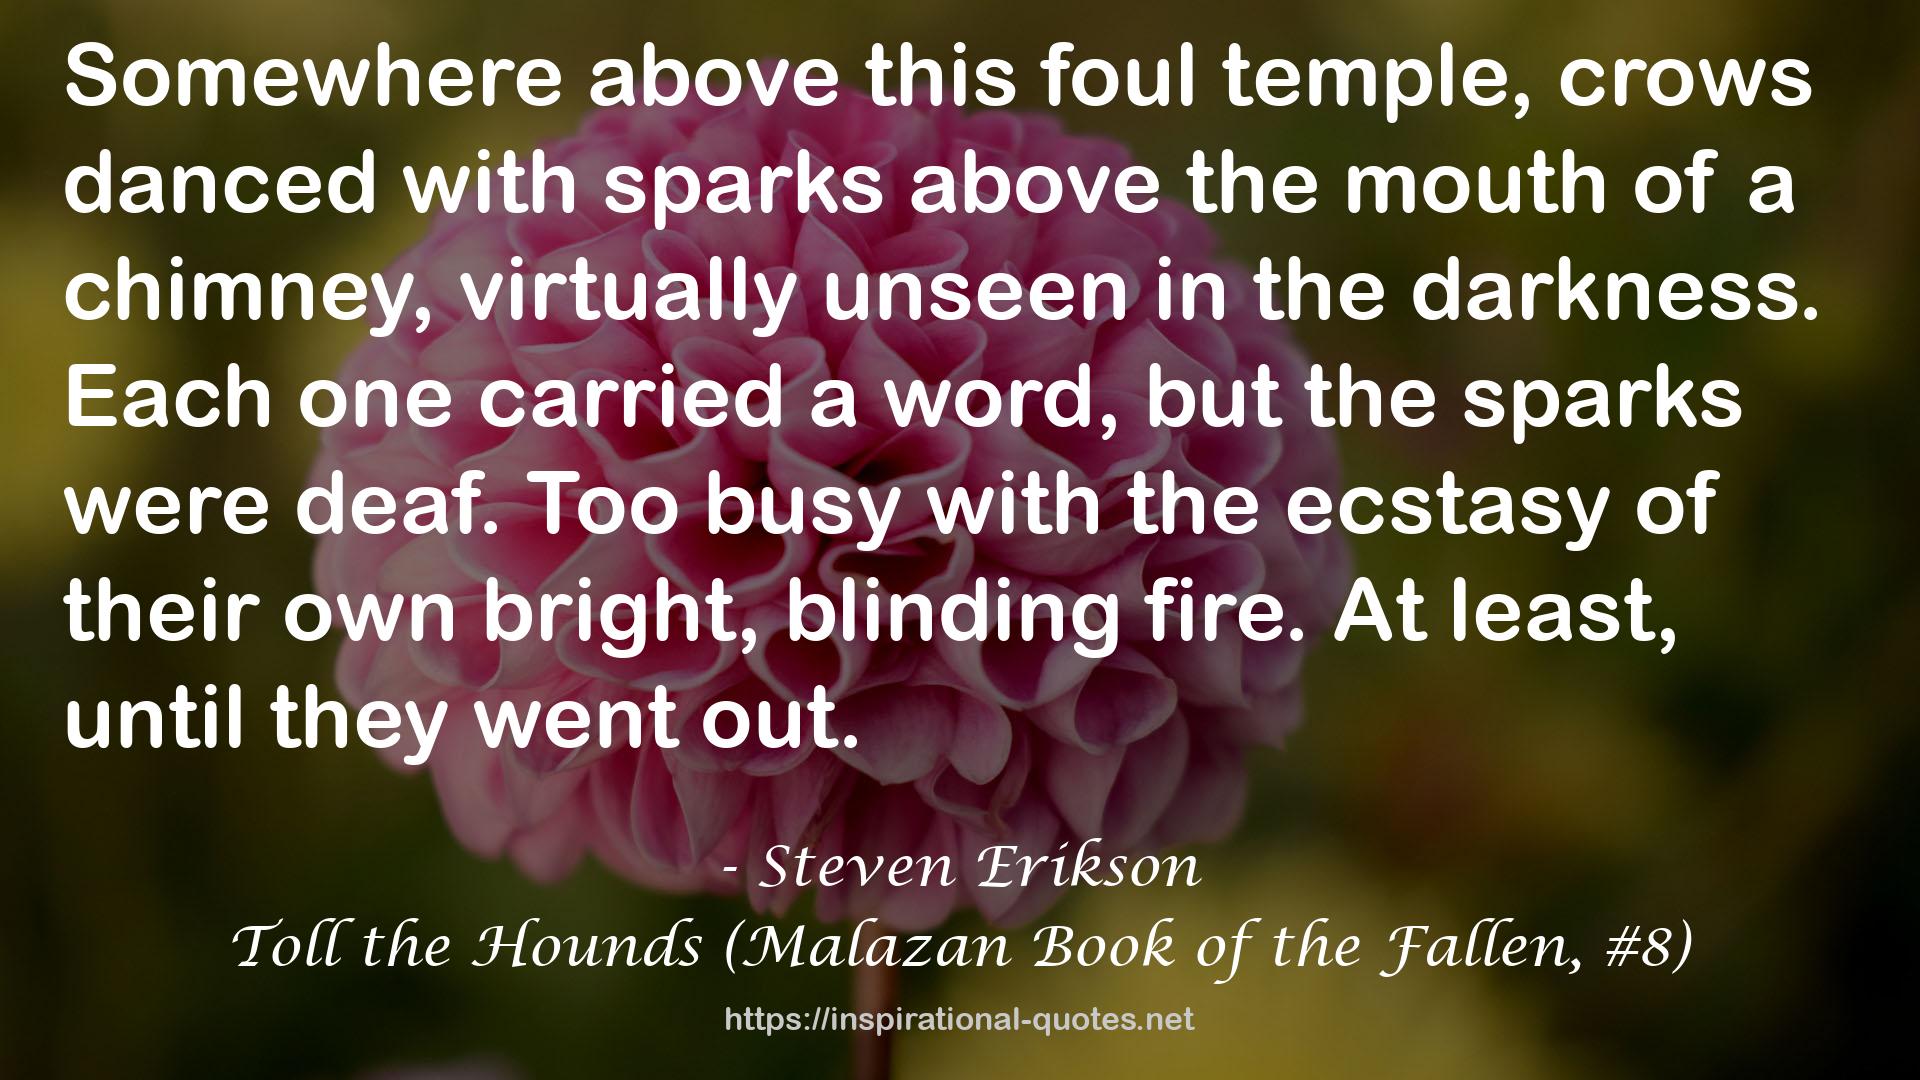 Toll the Hounds (Malazan Book of the Fallen, #8) QUOTES